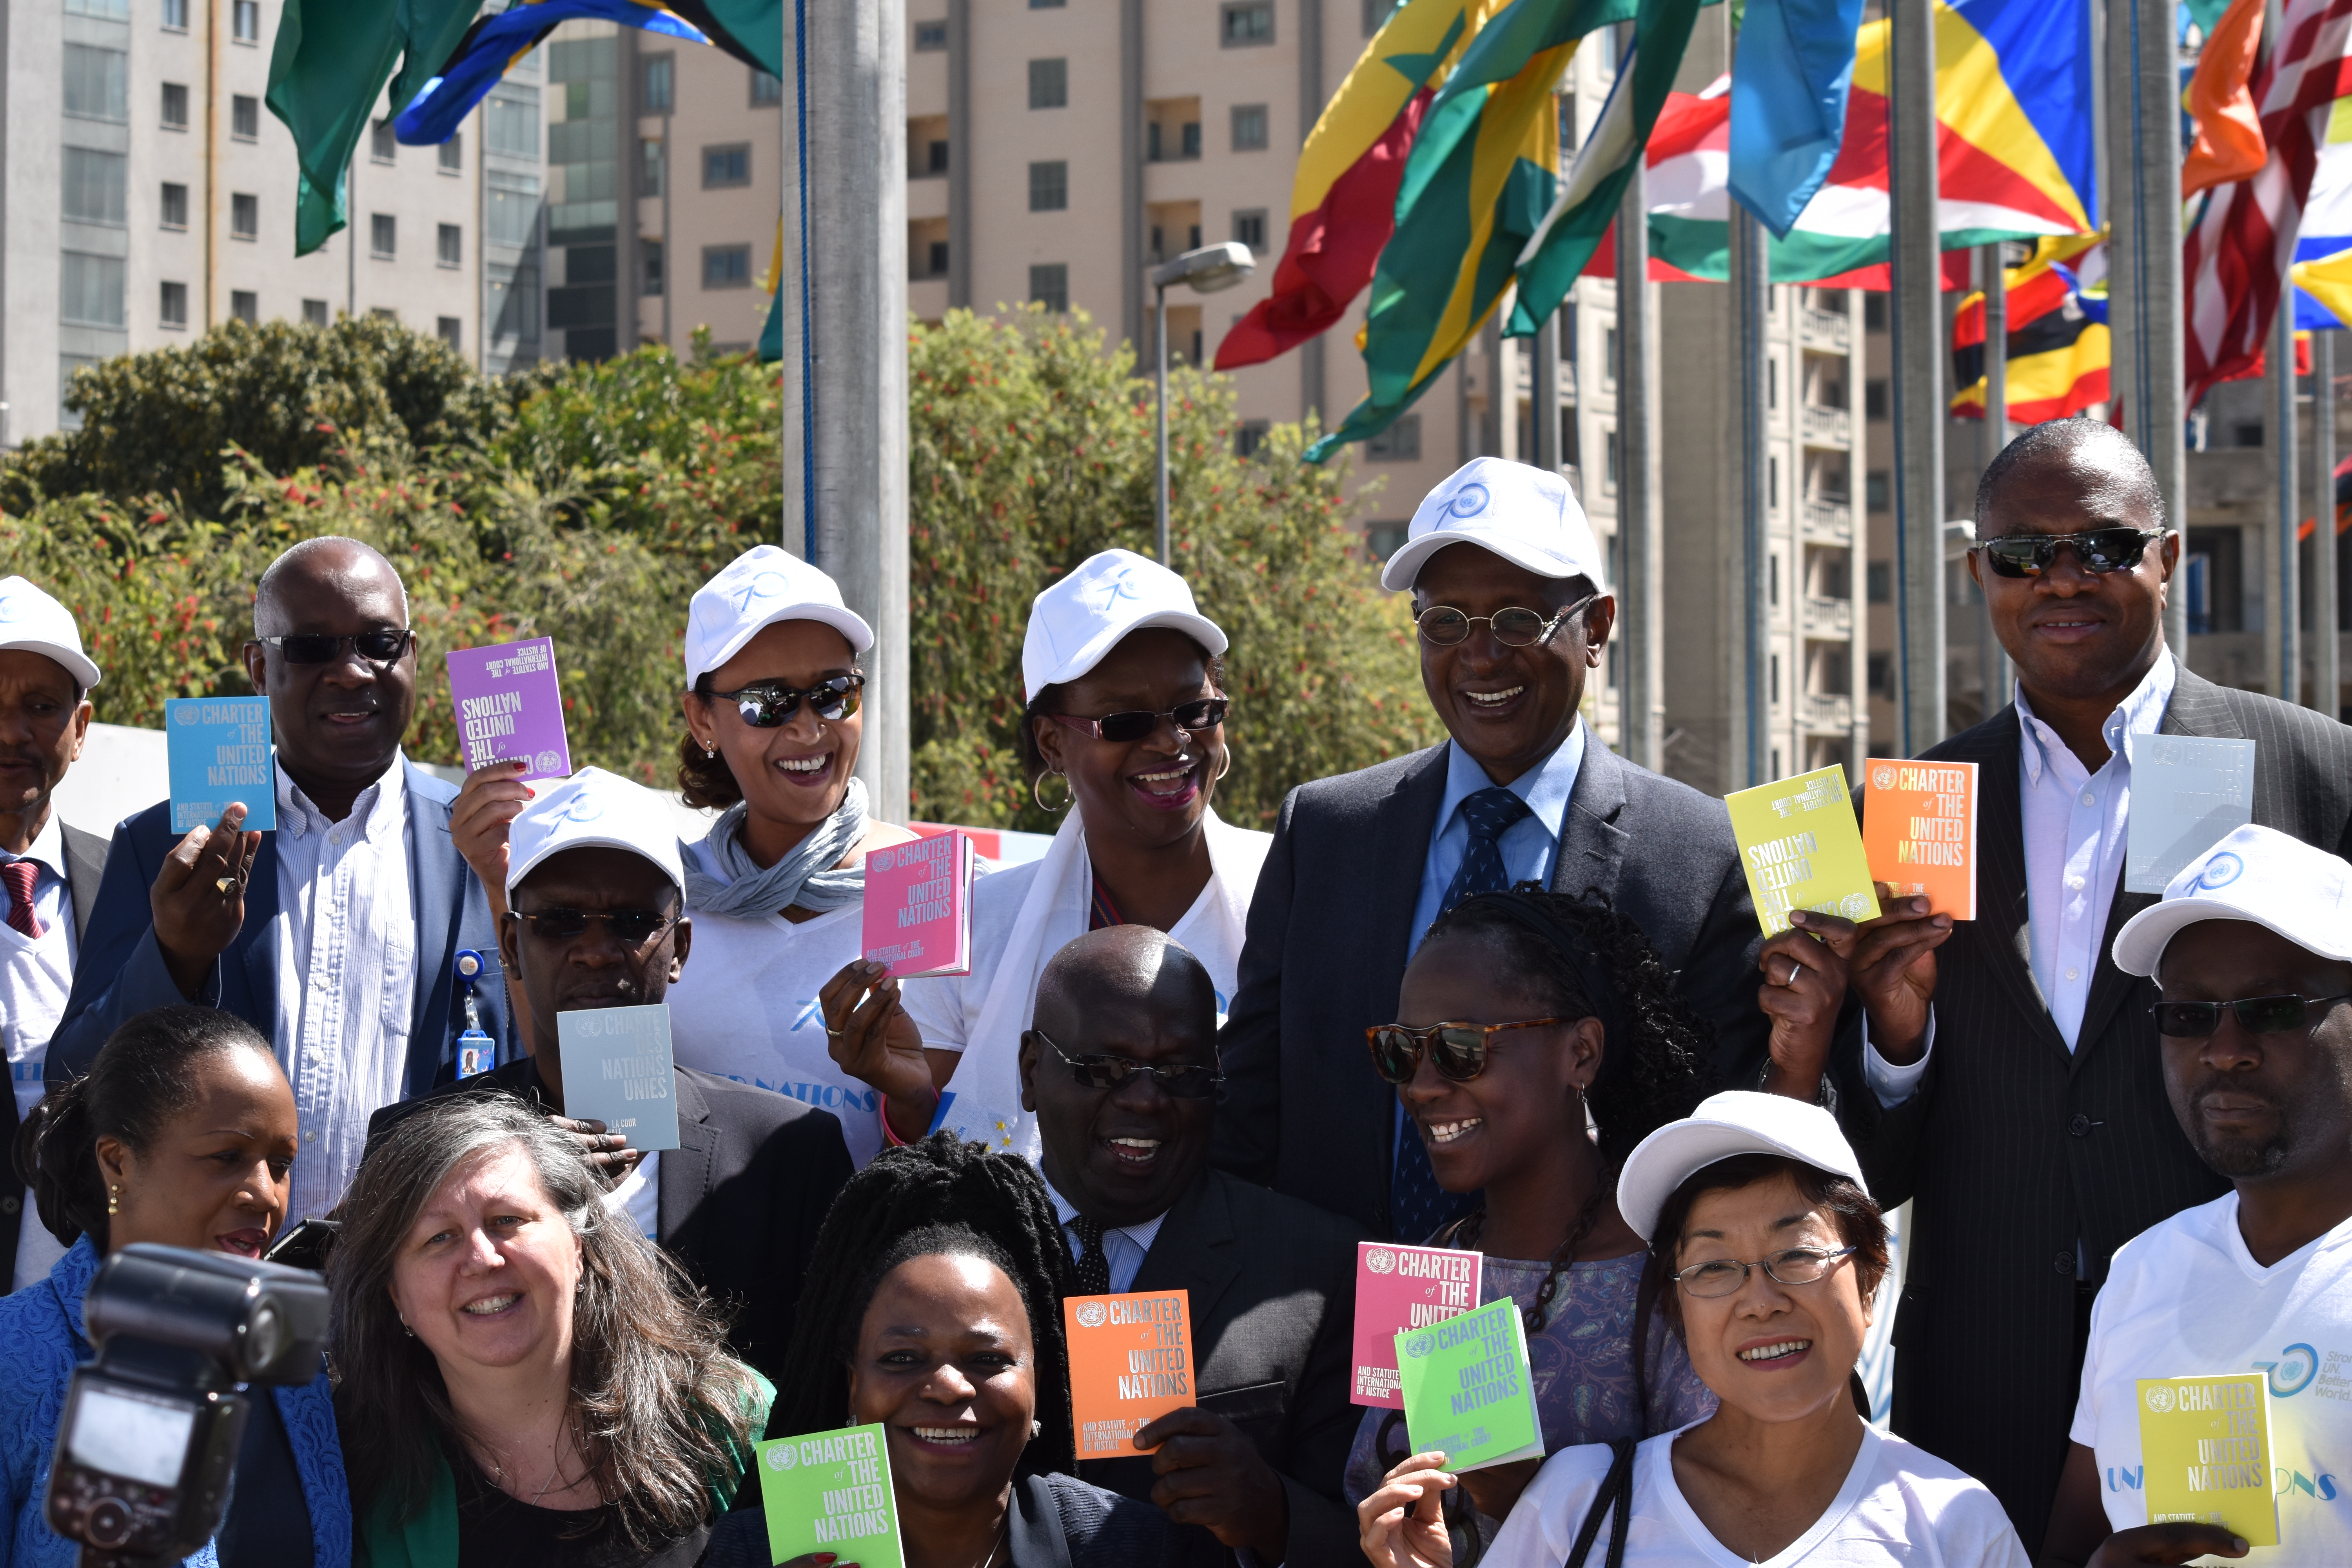 Ethiopia celebrated 70th anniversary of the United Nations